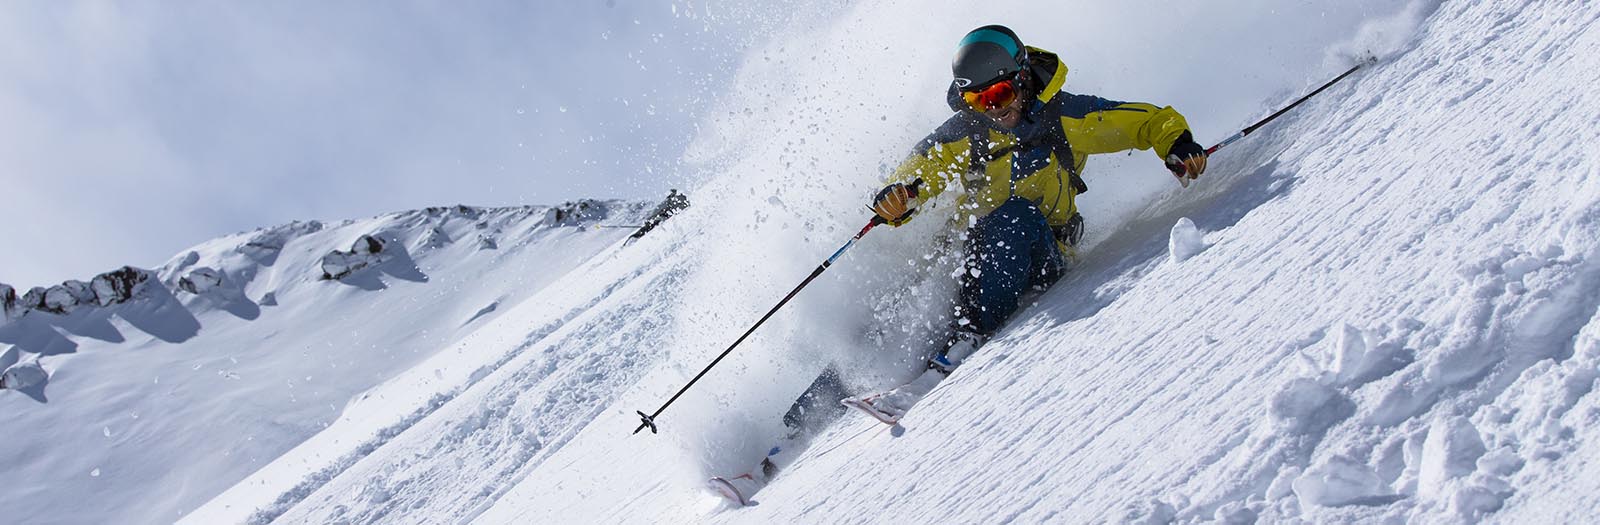 chile ski resorts, chile ski vacation packages, south america ski resorts, south america ski trips